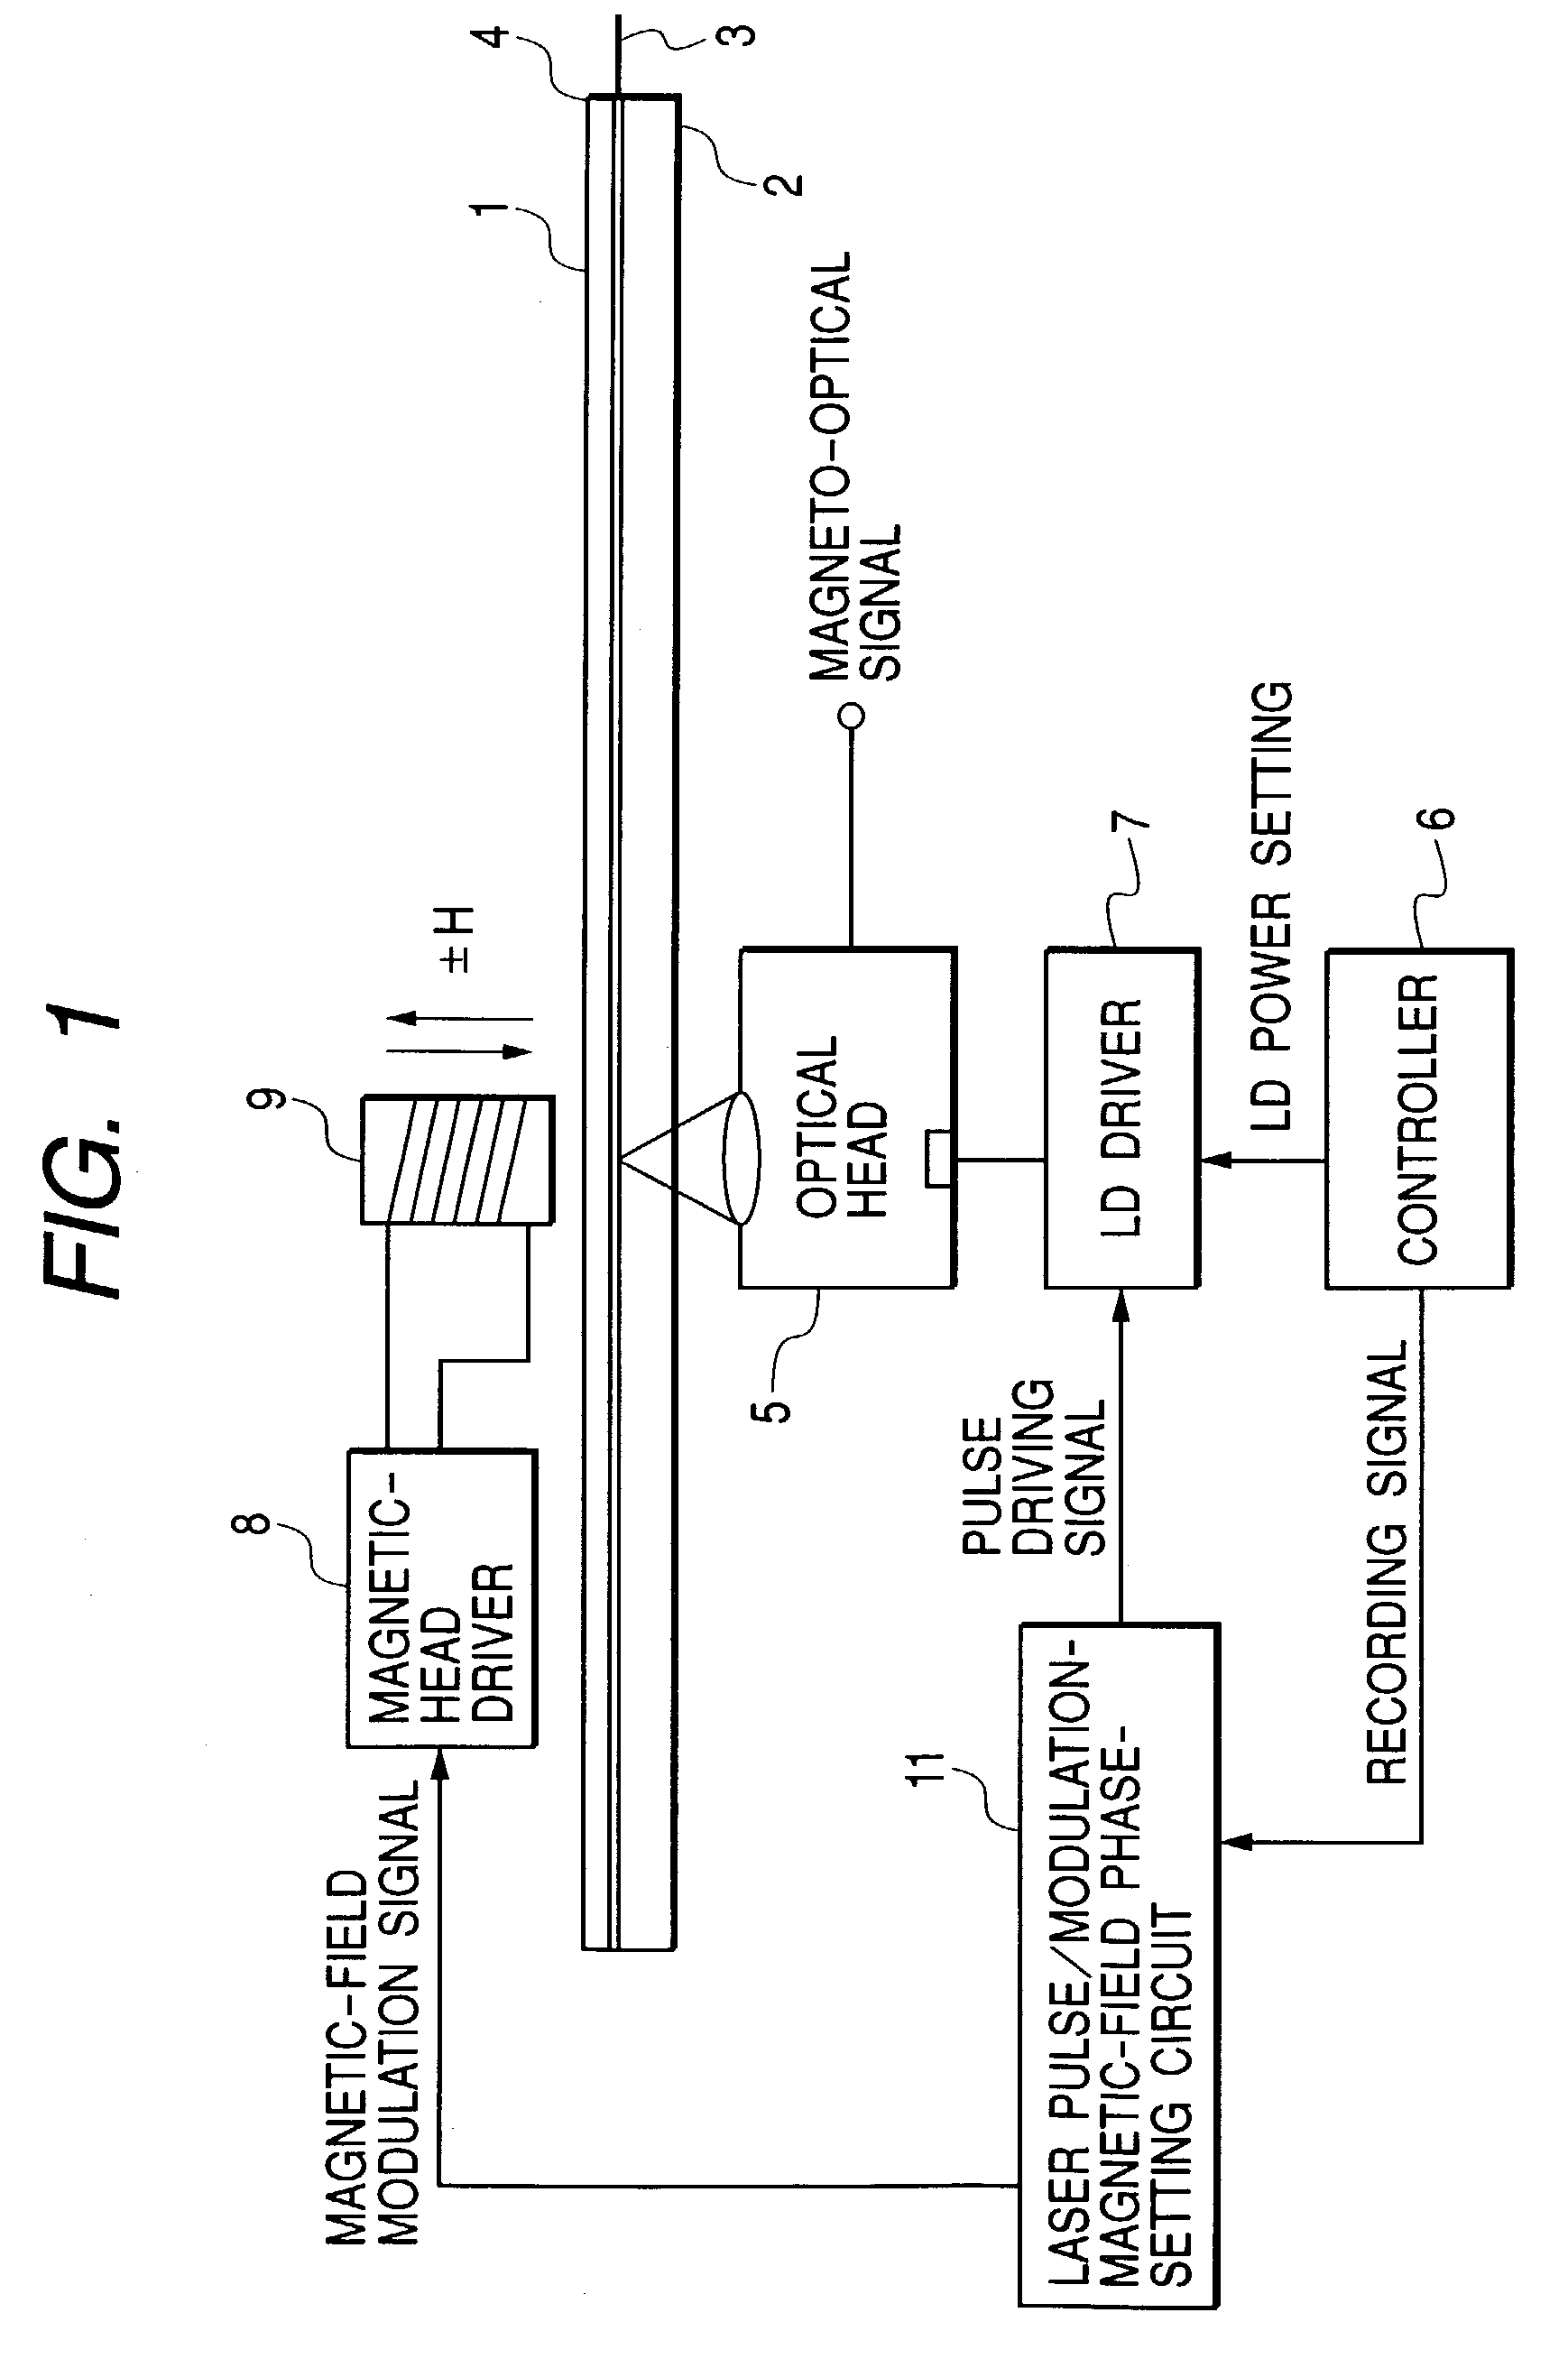 Magneto-optical recording device capable of setting the time phase of laser pulses and magnetic fields